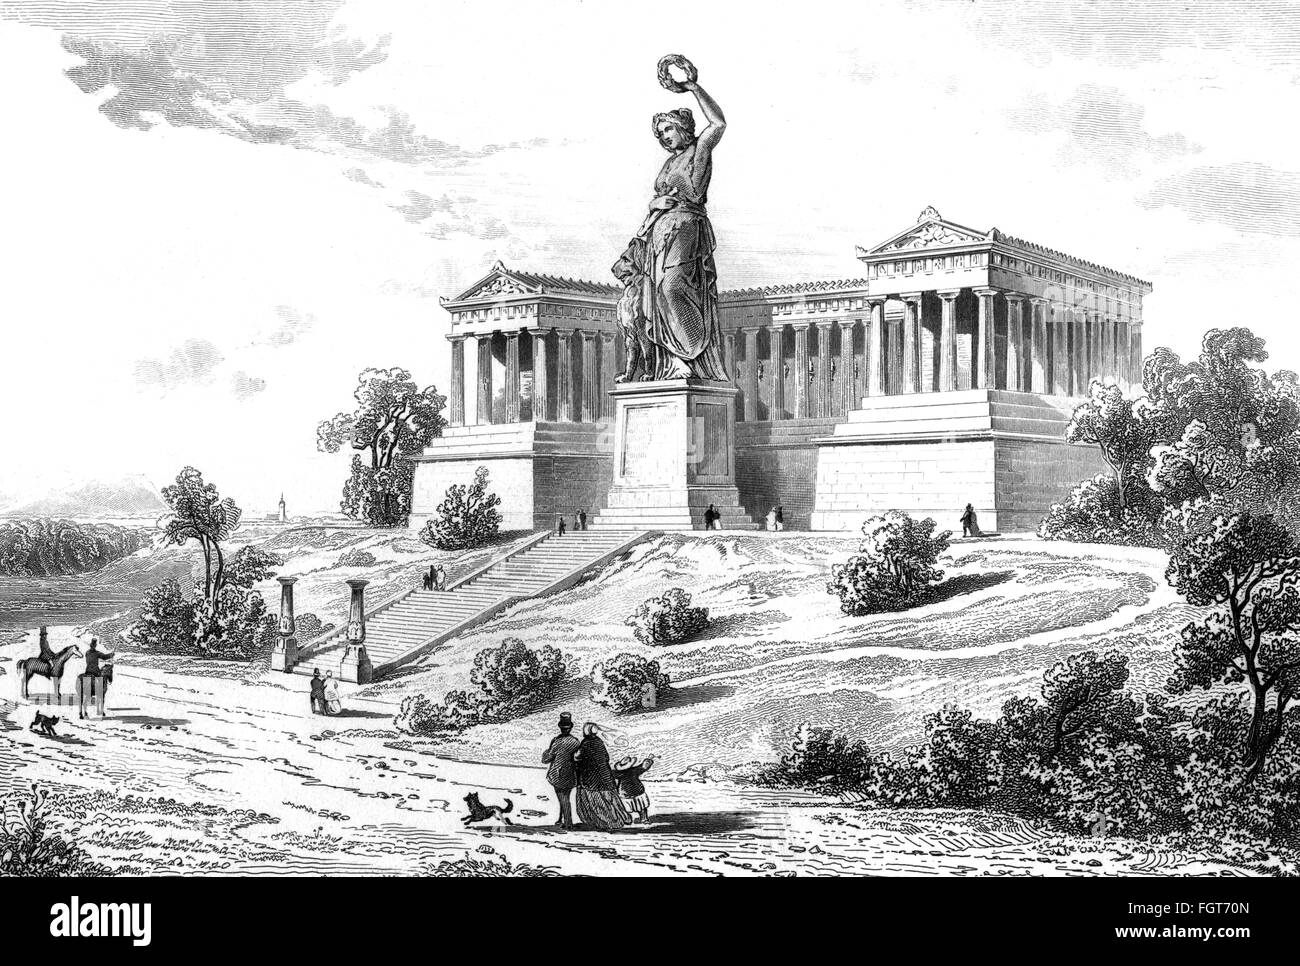 geography / travel, Germany, Munich, monuments, Ruhmeshalle (hall of fame) with Bavaria, built 1843 - 1853, architect: Leo von Klenze, sculpture by Johann Baptist Stiglmaier and Ferdinand von Miller, 1850, exterior view, lithograph, 19th century, Patrona Bavariae, personification, architecture, fine arts, art, classicism, ancient temple, city, Kingdom of Bavaria, people, monuments, monument, sculpture, sculptures, historic, historical, Additional-Rights-Clearences-Not Available Stock Photo